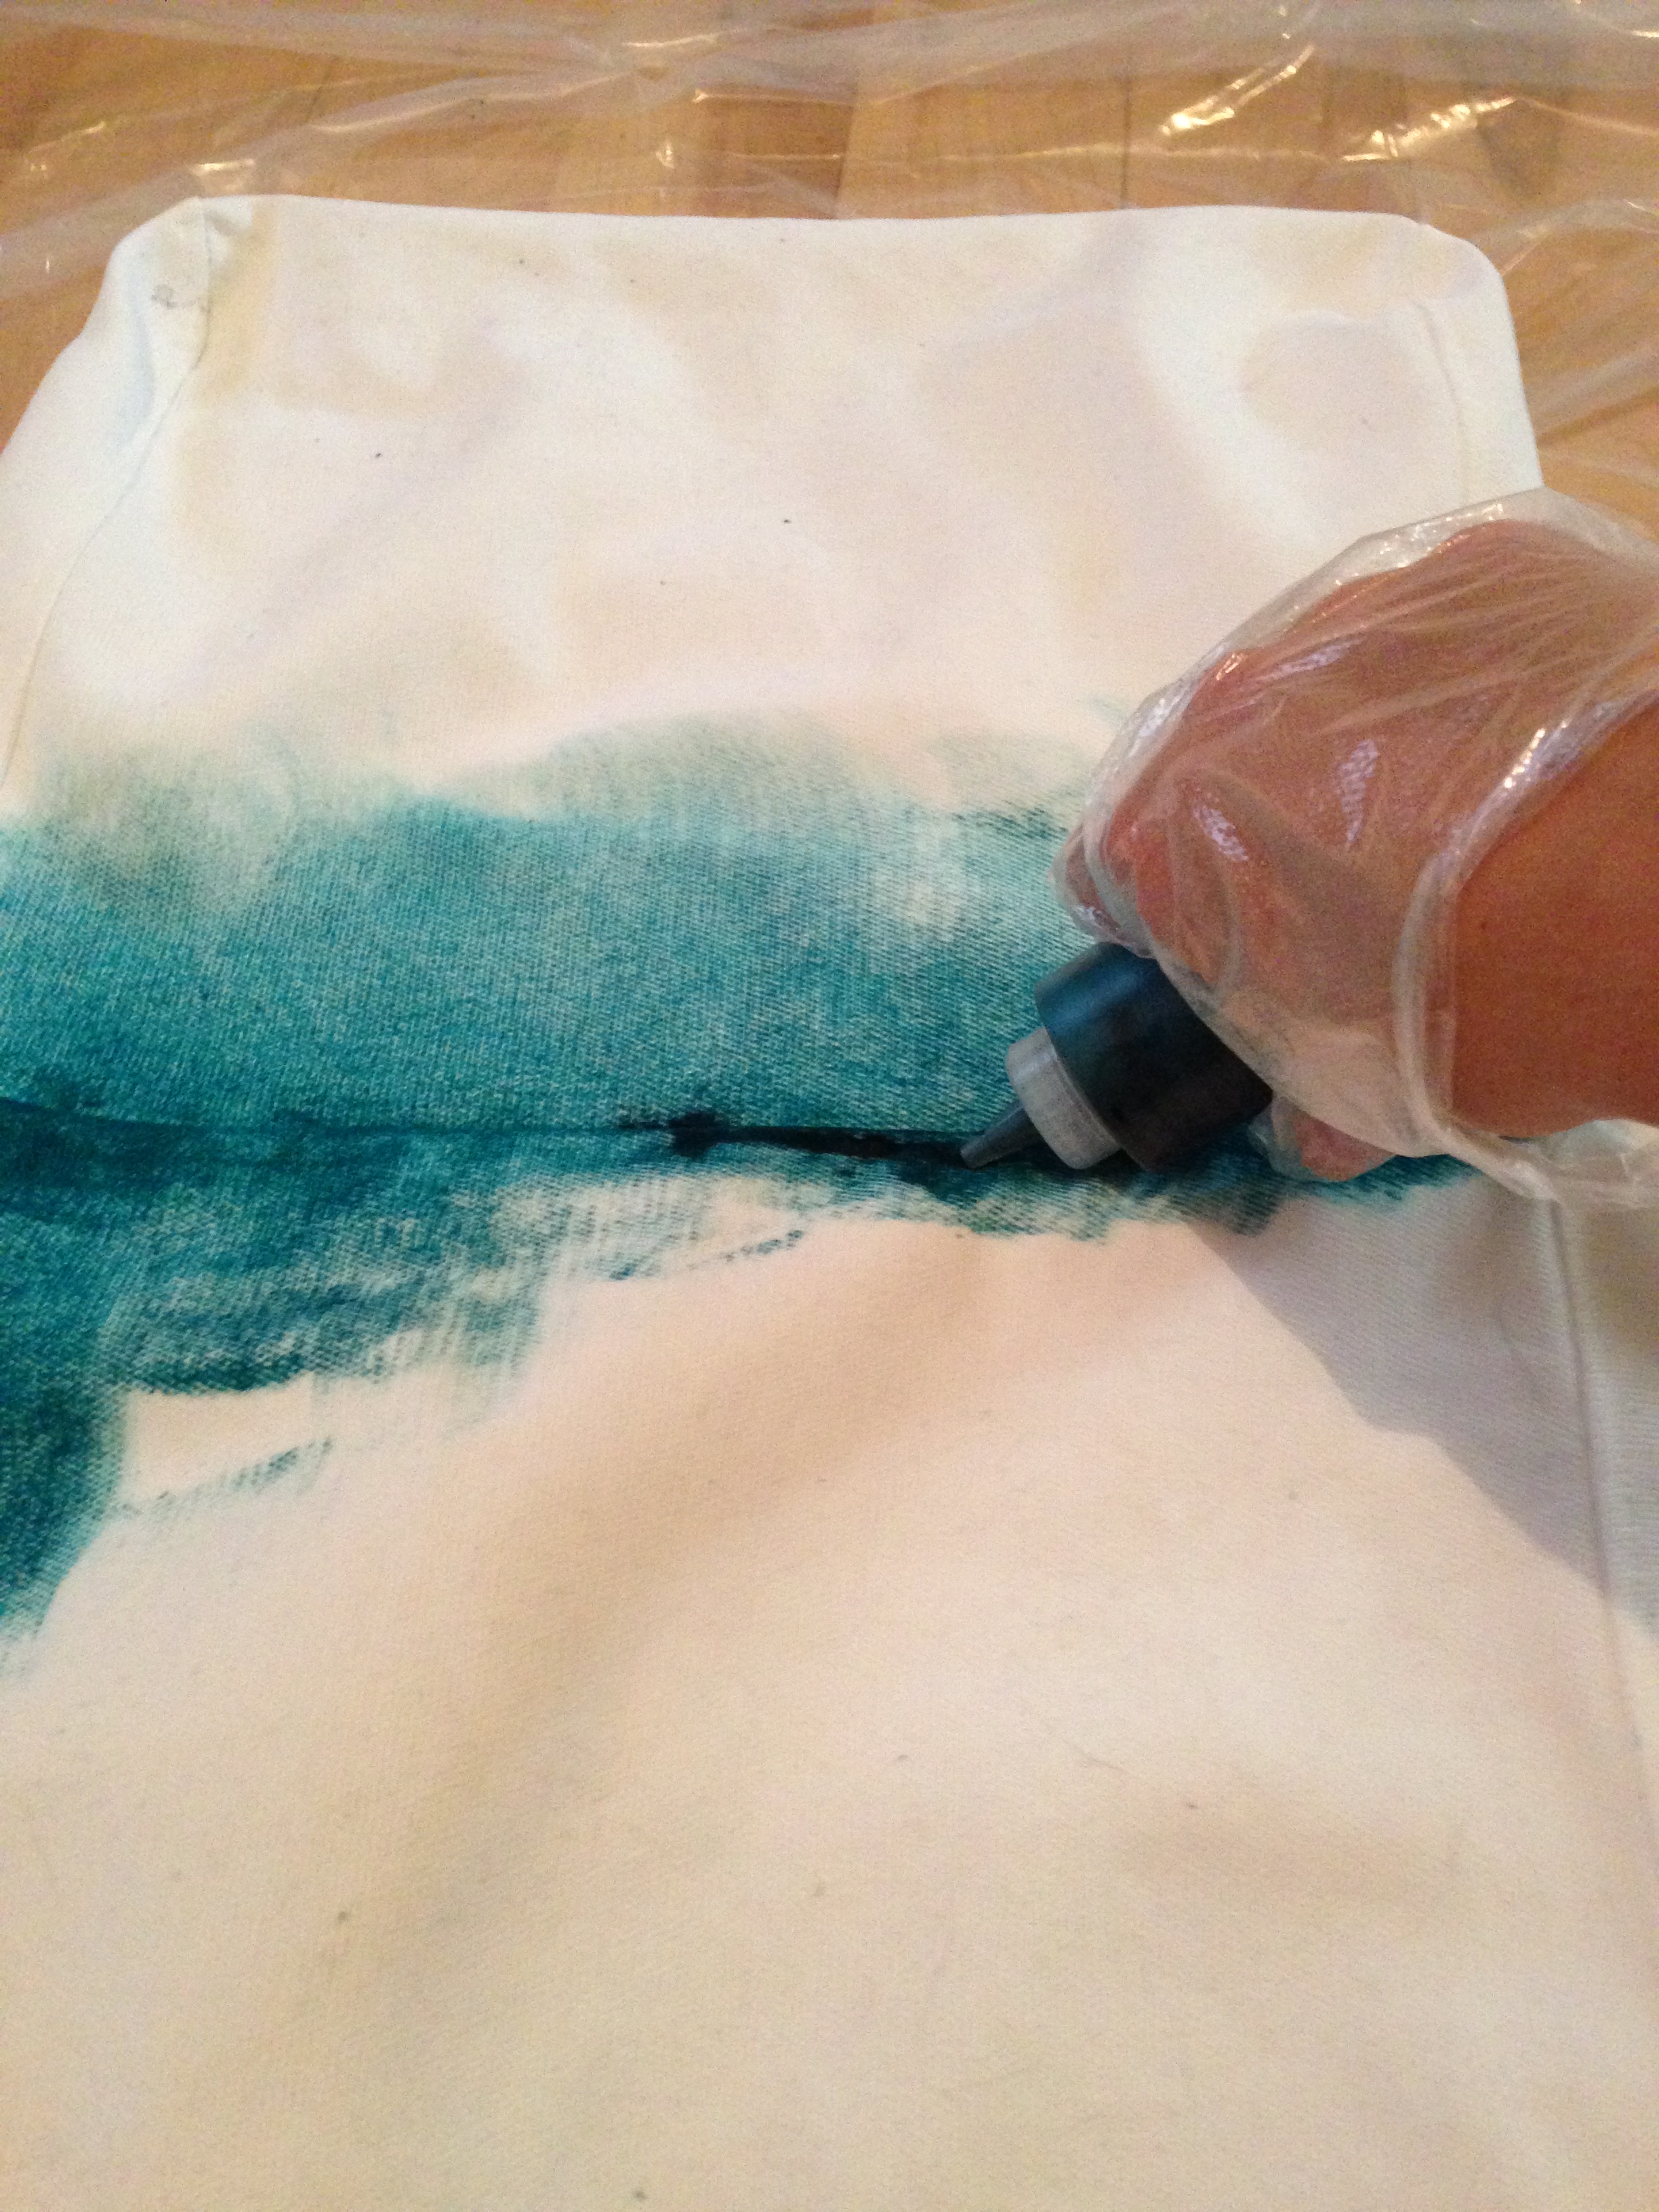 Tie-dying the chair cover